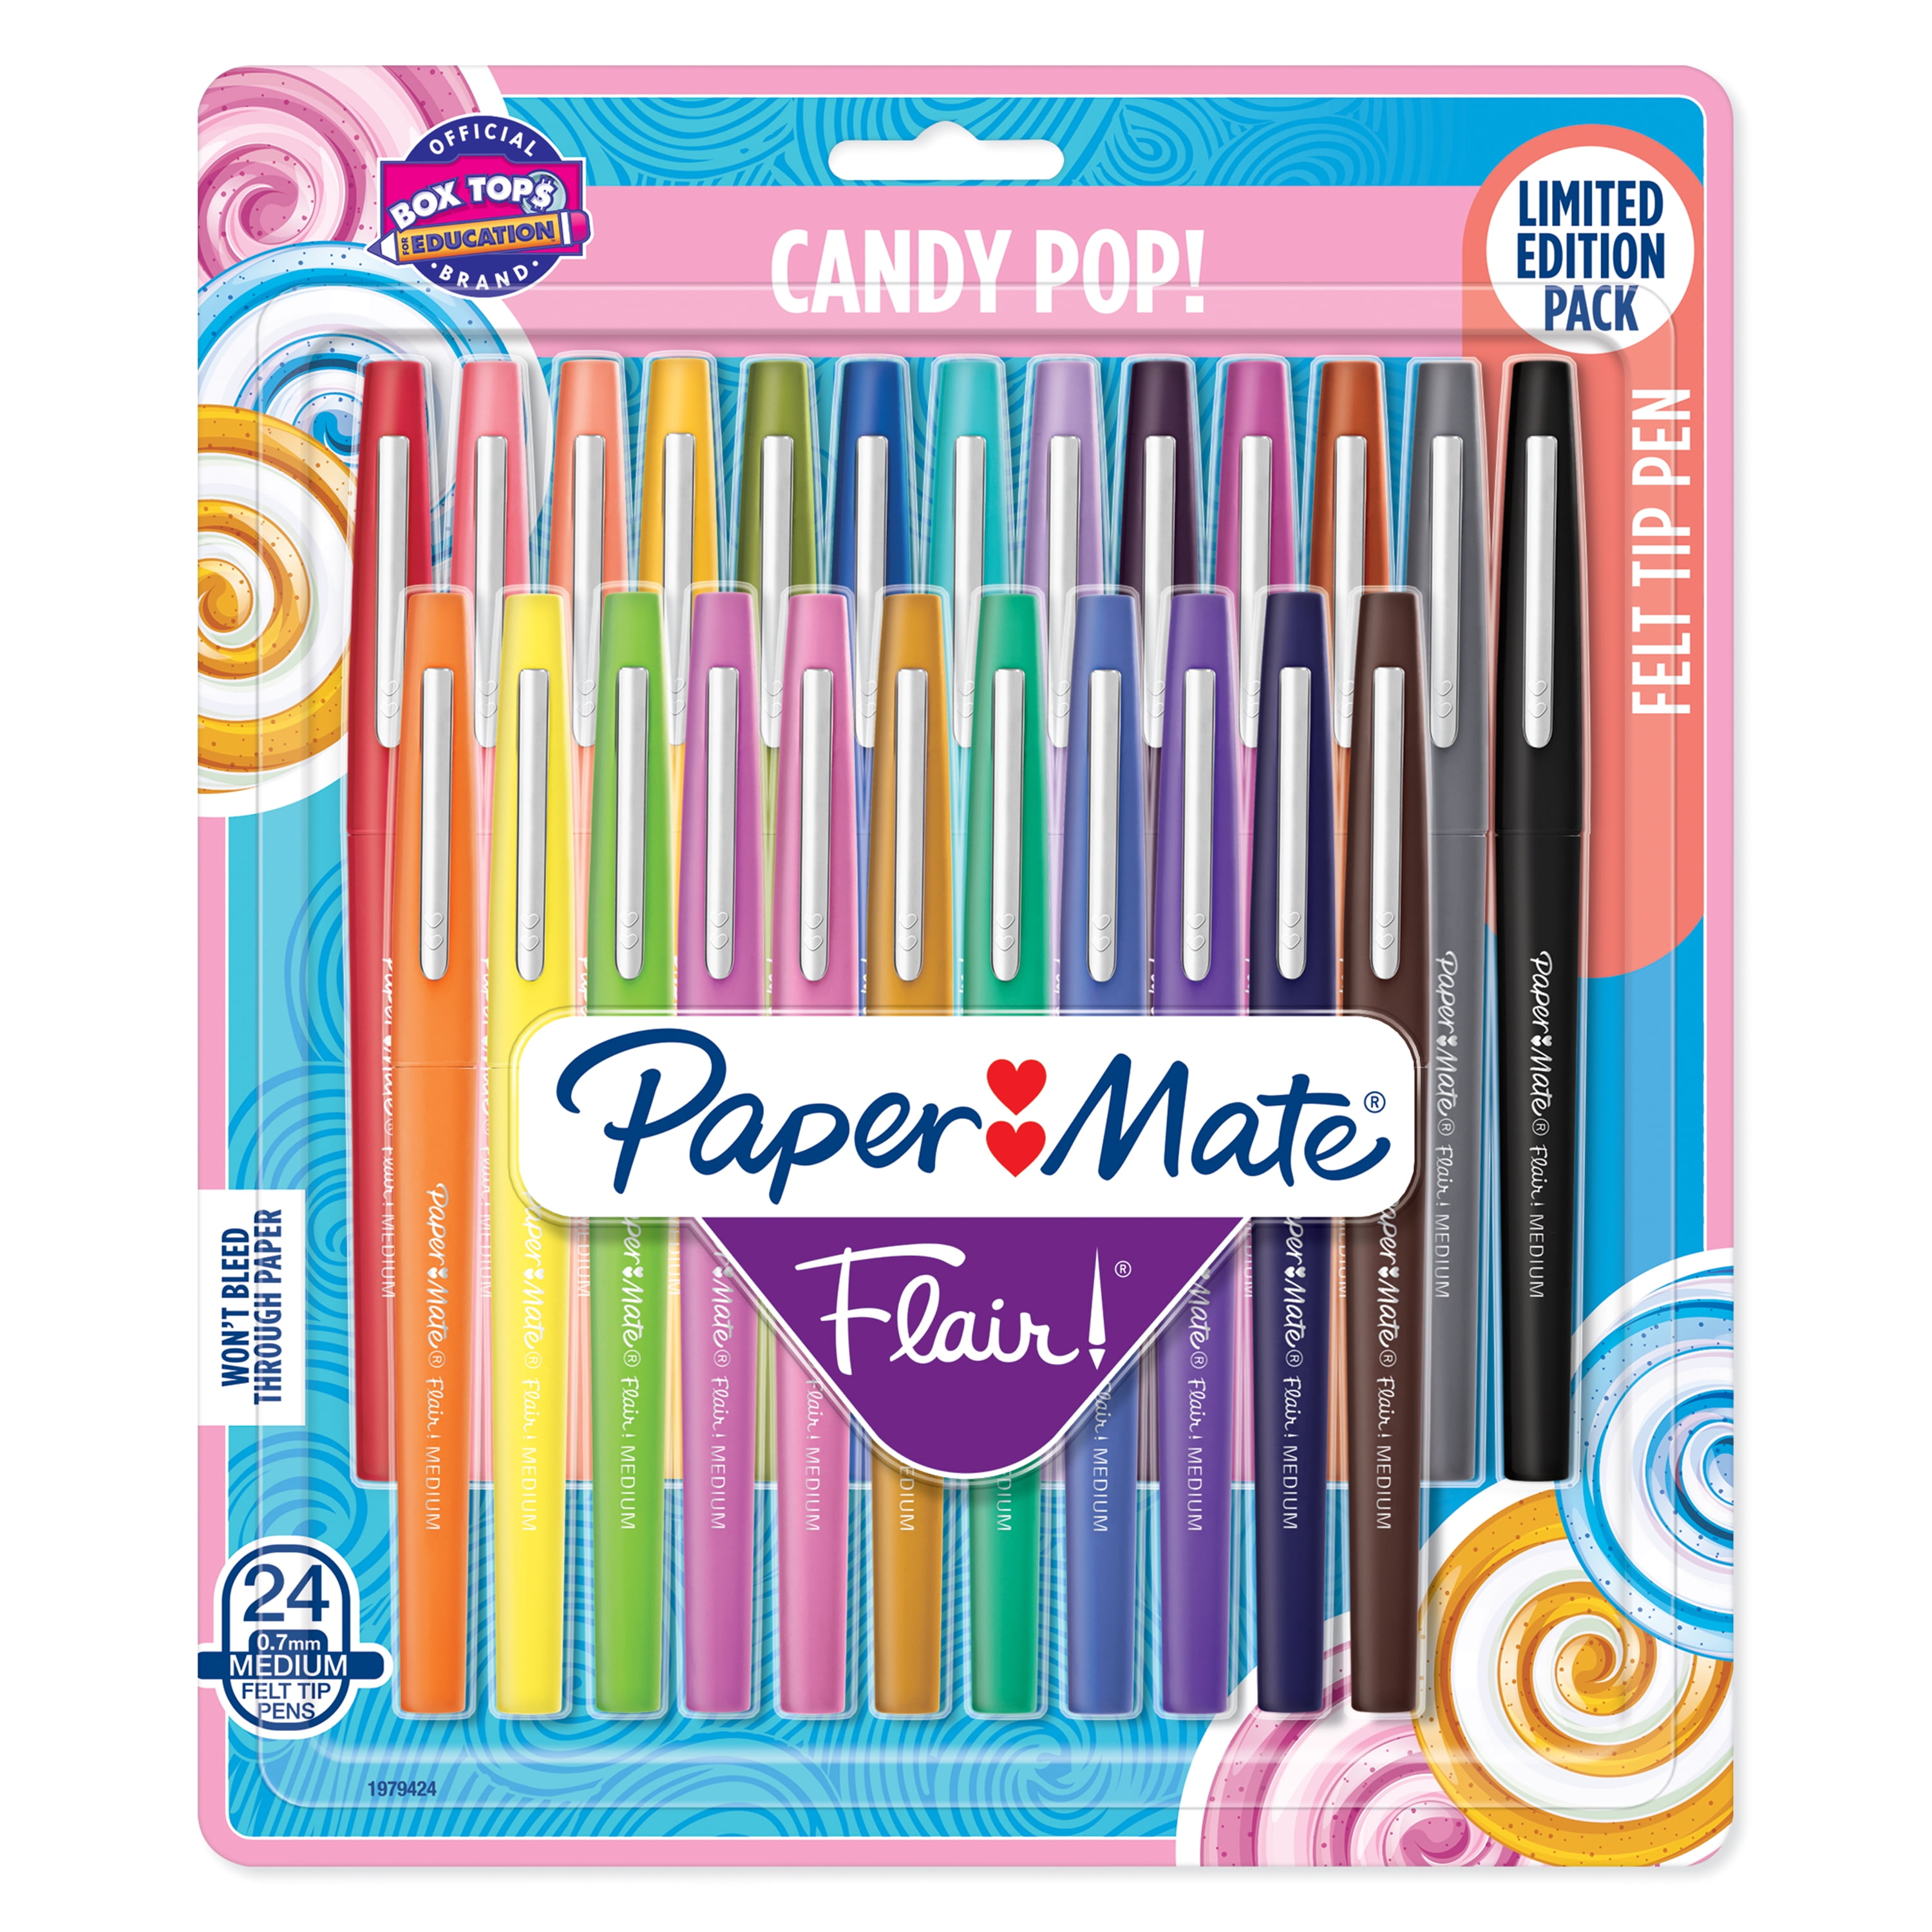 1 Medium Point 0.7 mm Limited Edition Candy Pop Pack Marker Pens 24 Count Flair Felt Tip Pens 